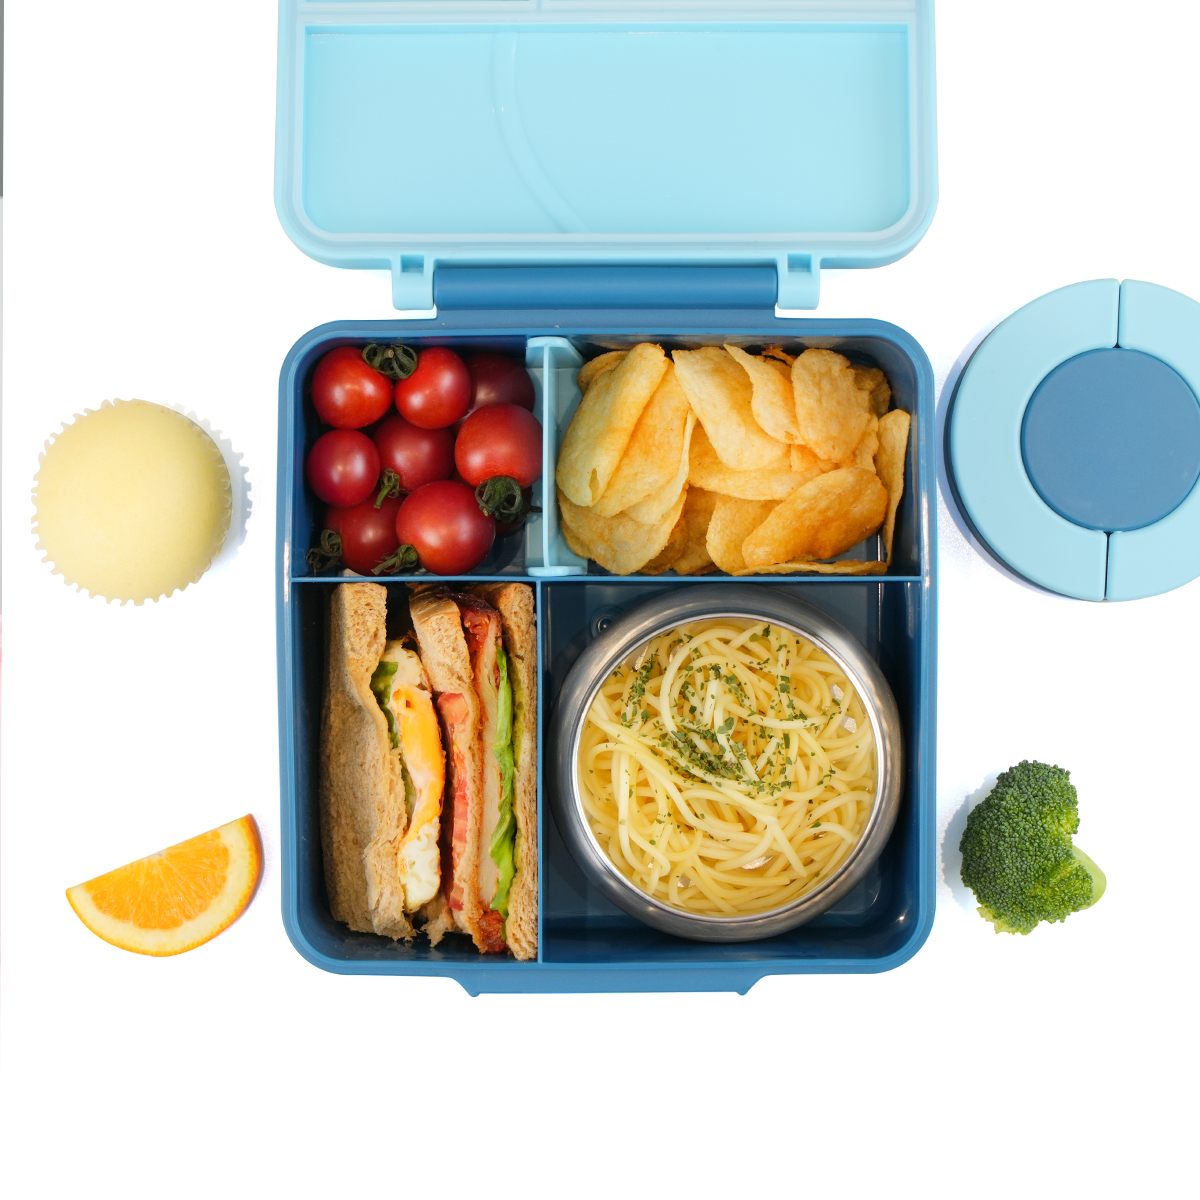 New Arrival Leakproof Plastic Baby Lunch Box Toddler Bento Box Compartment Kids Lunch Box